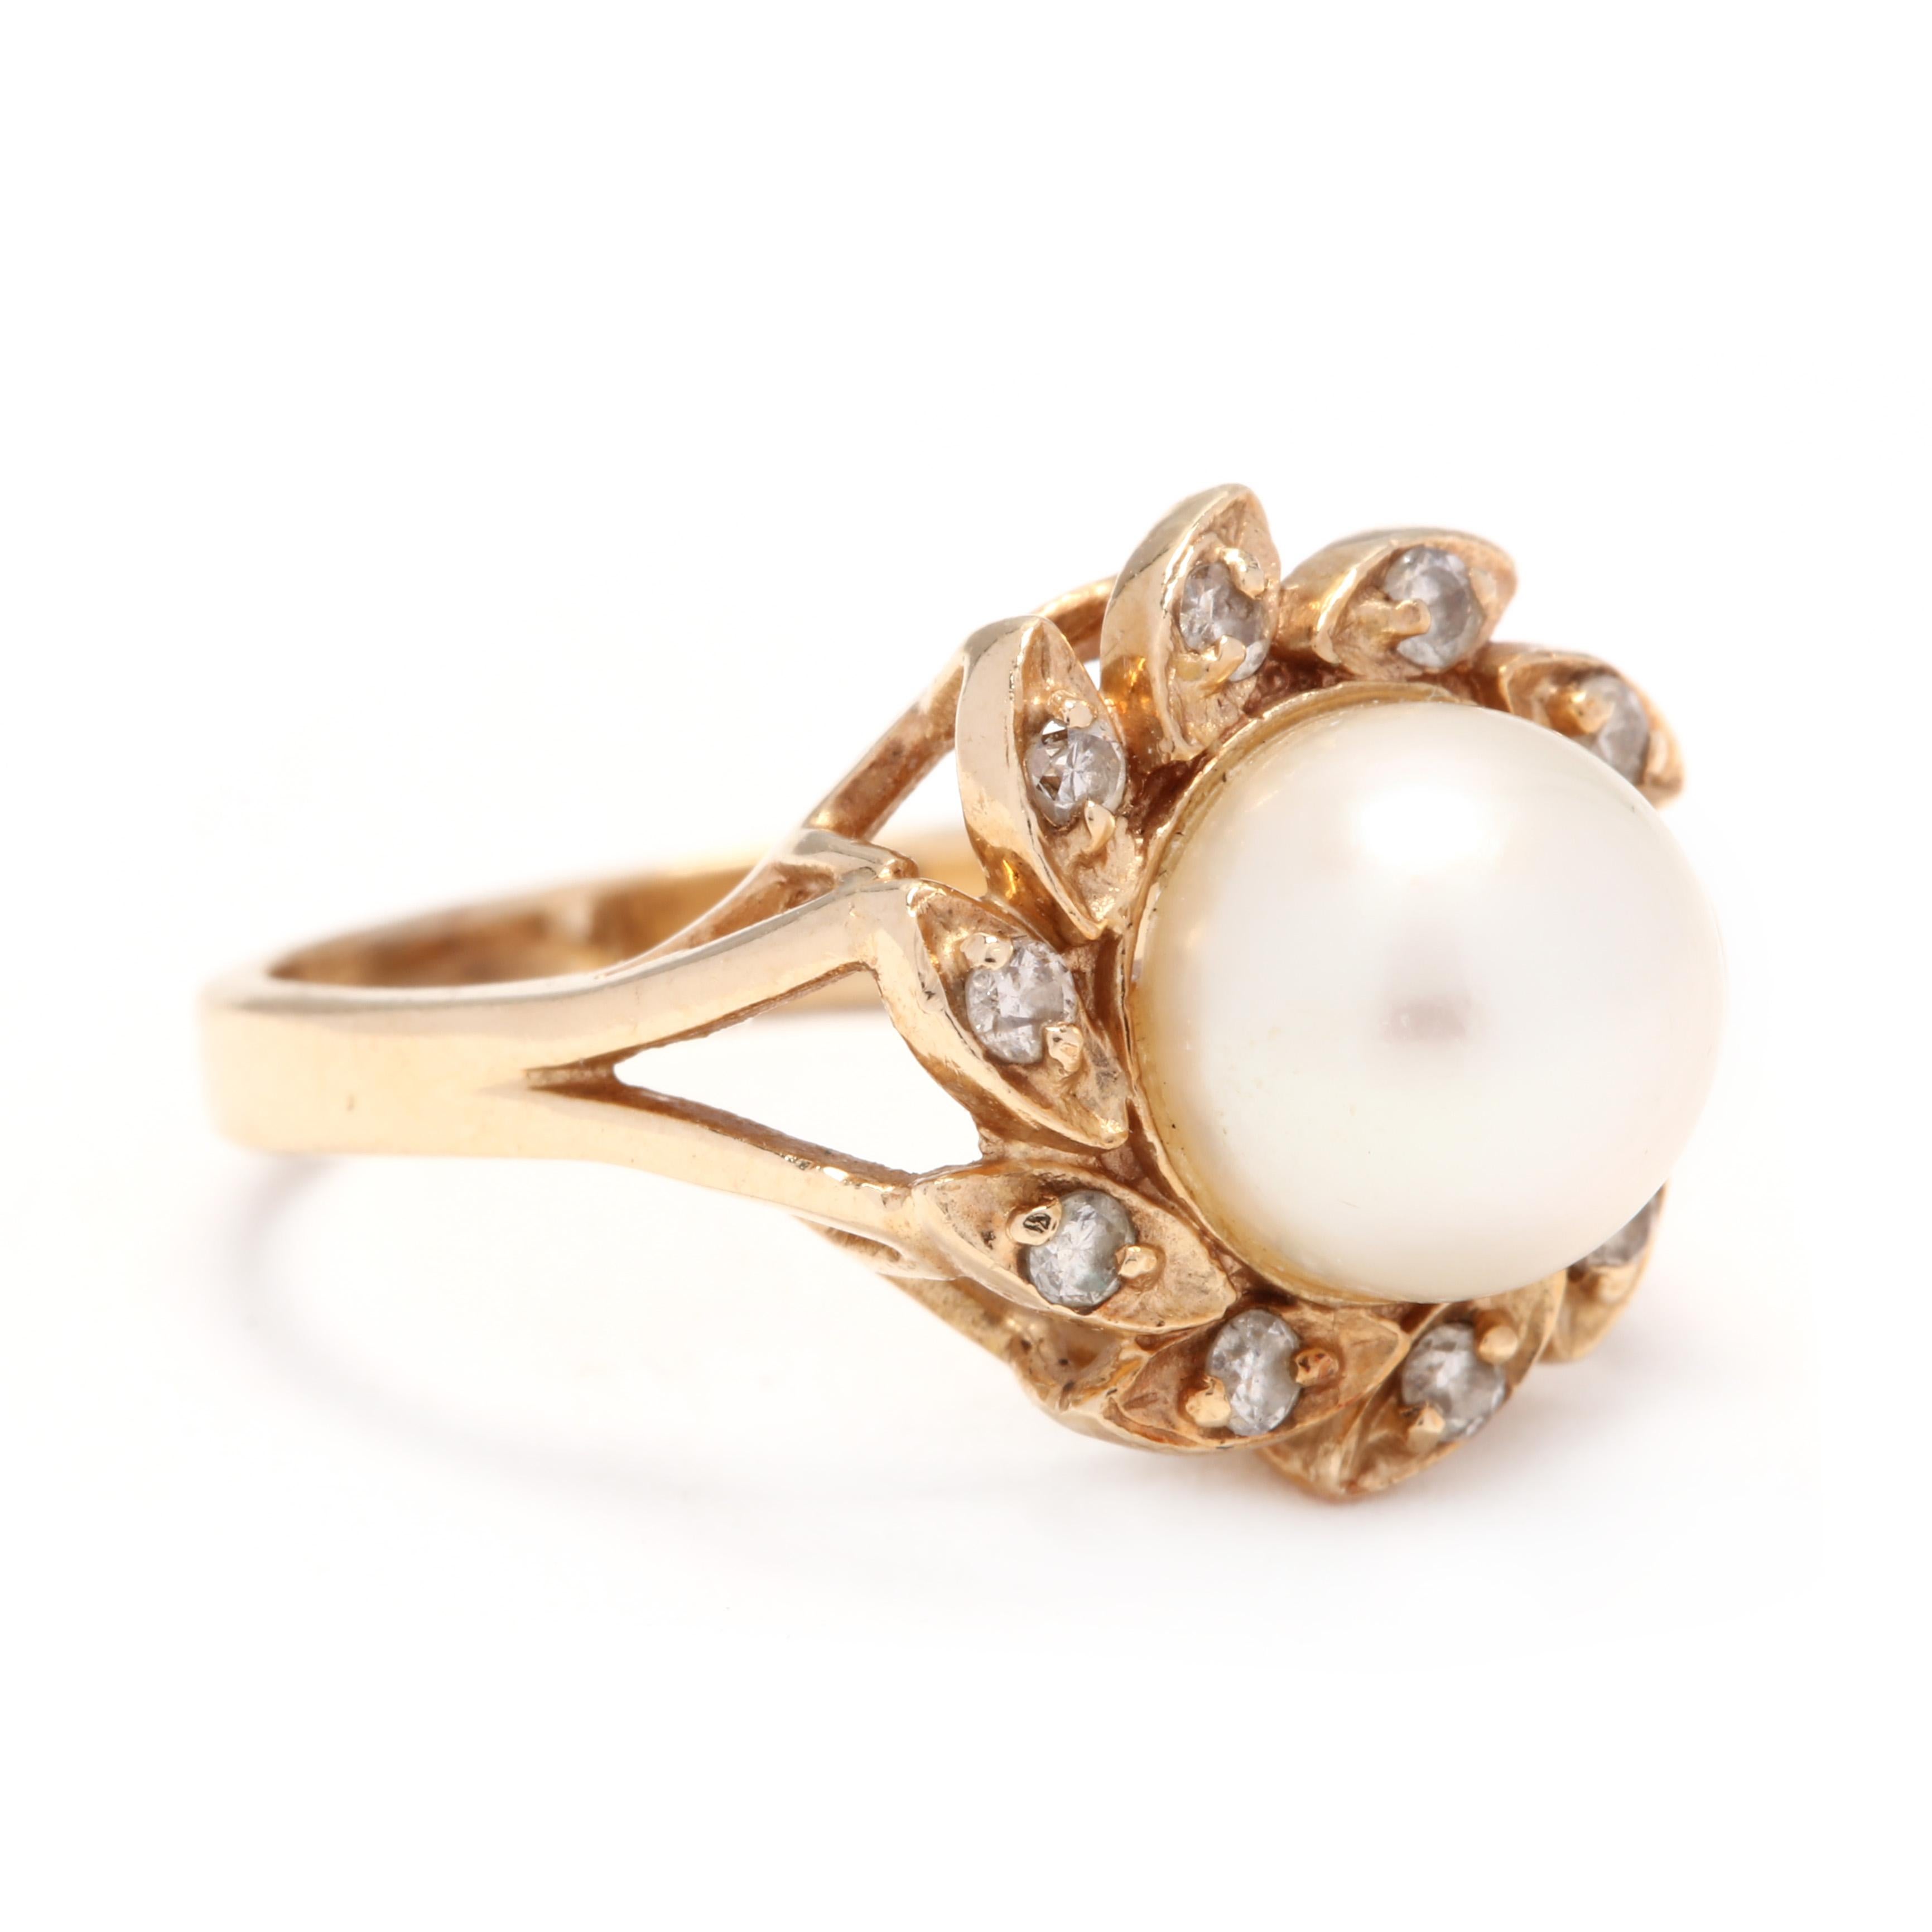 A 14 karat yellow gold, pearl and diamond statement ring. This ring features a round bead pearl (8.15 mm) surrounded by single cut round diamonds weighing approximately .15 total carats set in navette settings and with a split shank.

Stones:
-